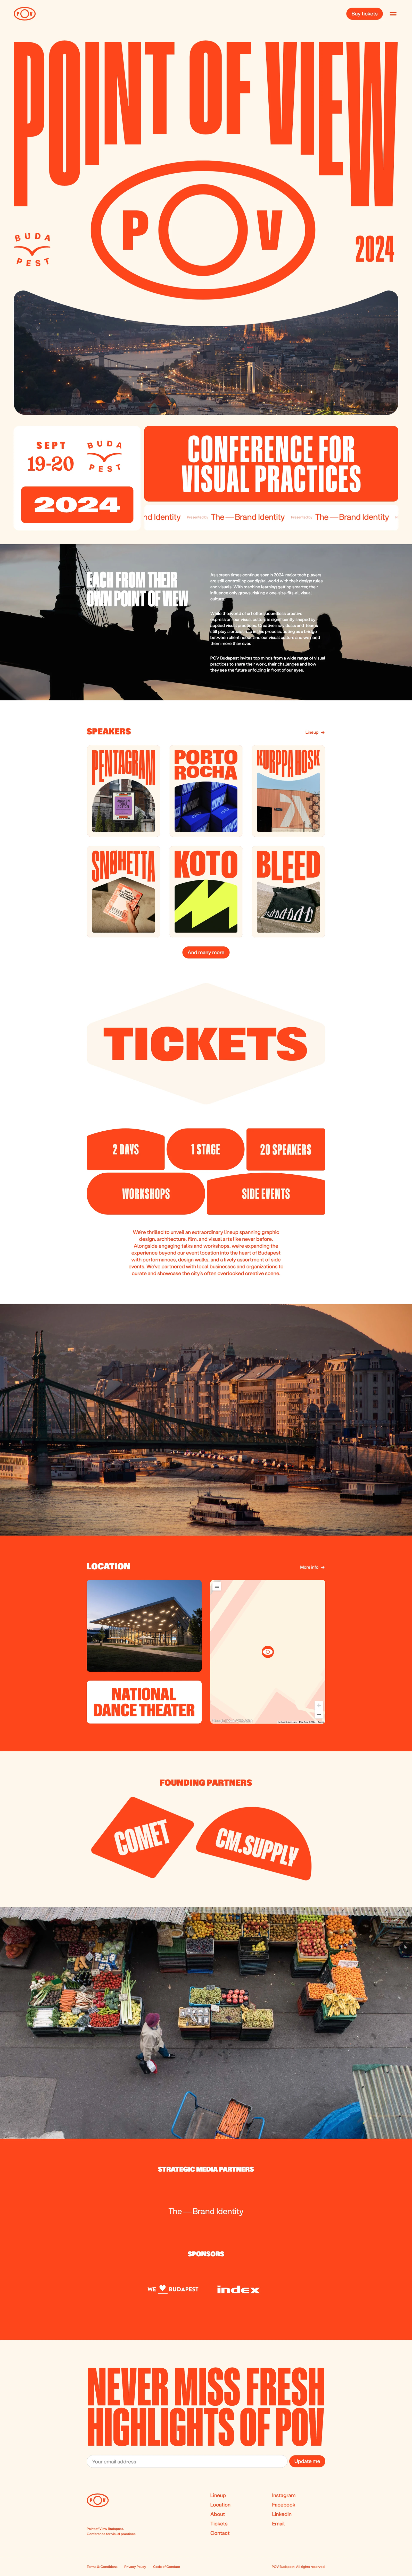 POV Budapest Landing Page Example: Join Budapest's first design conference to explore diverse perspectives and shape the future of visual culture.